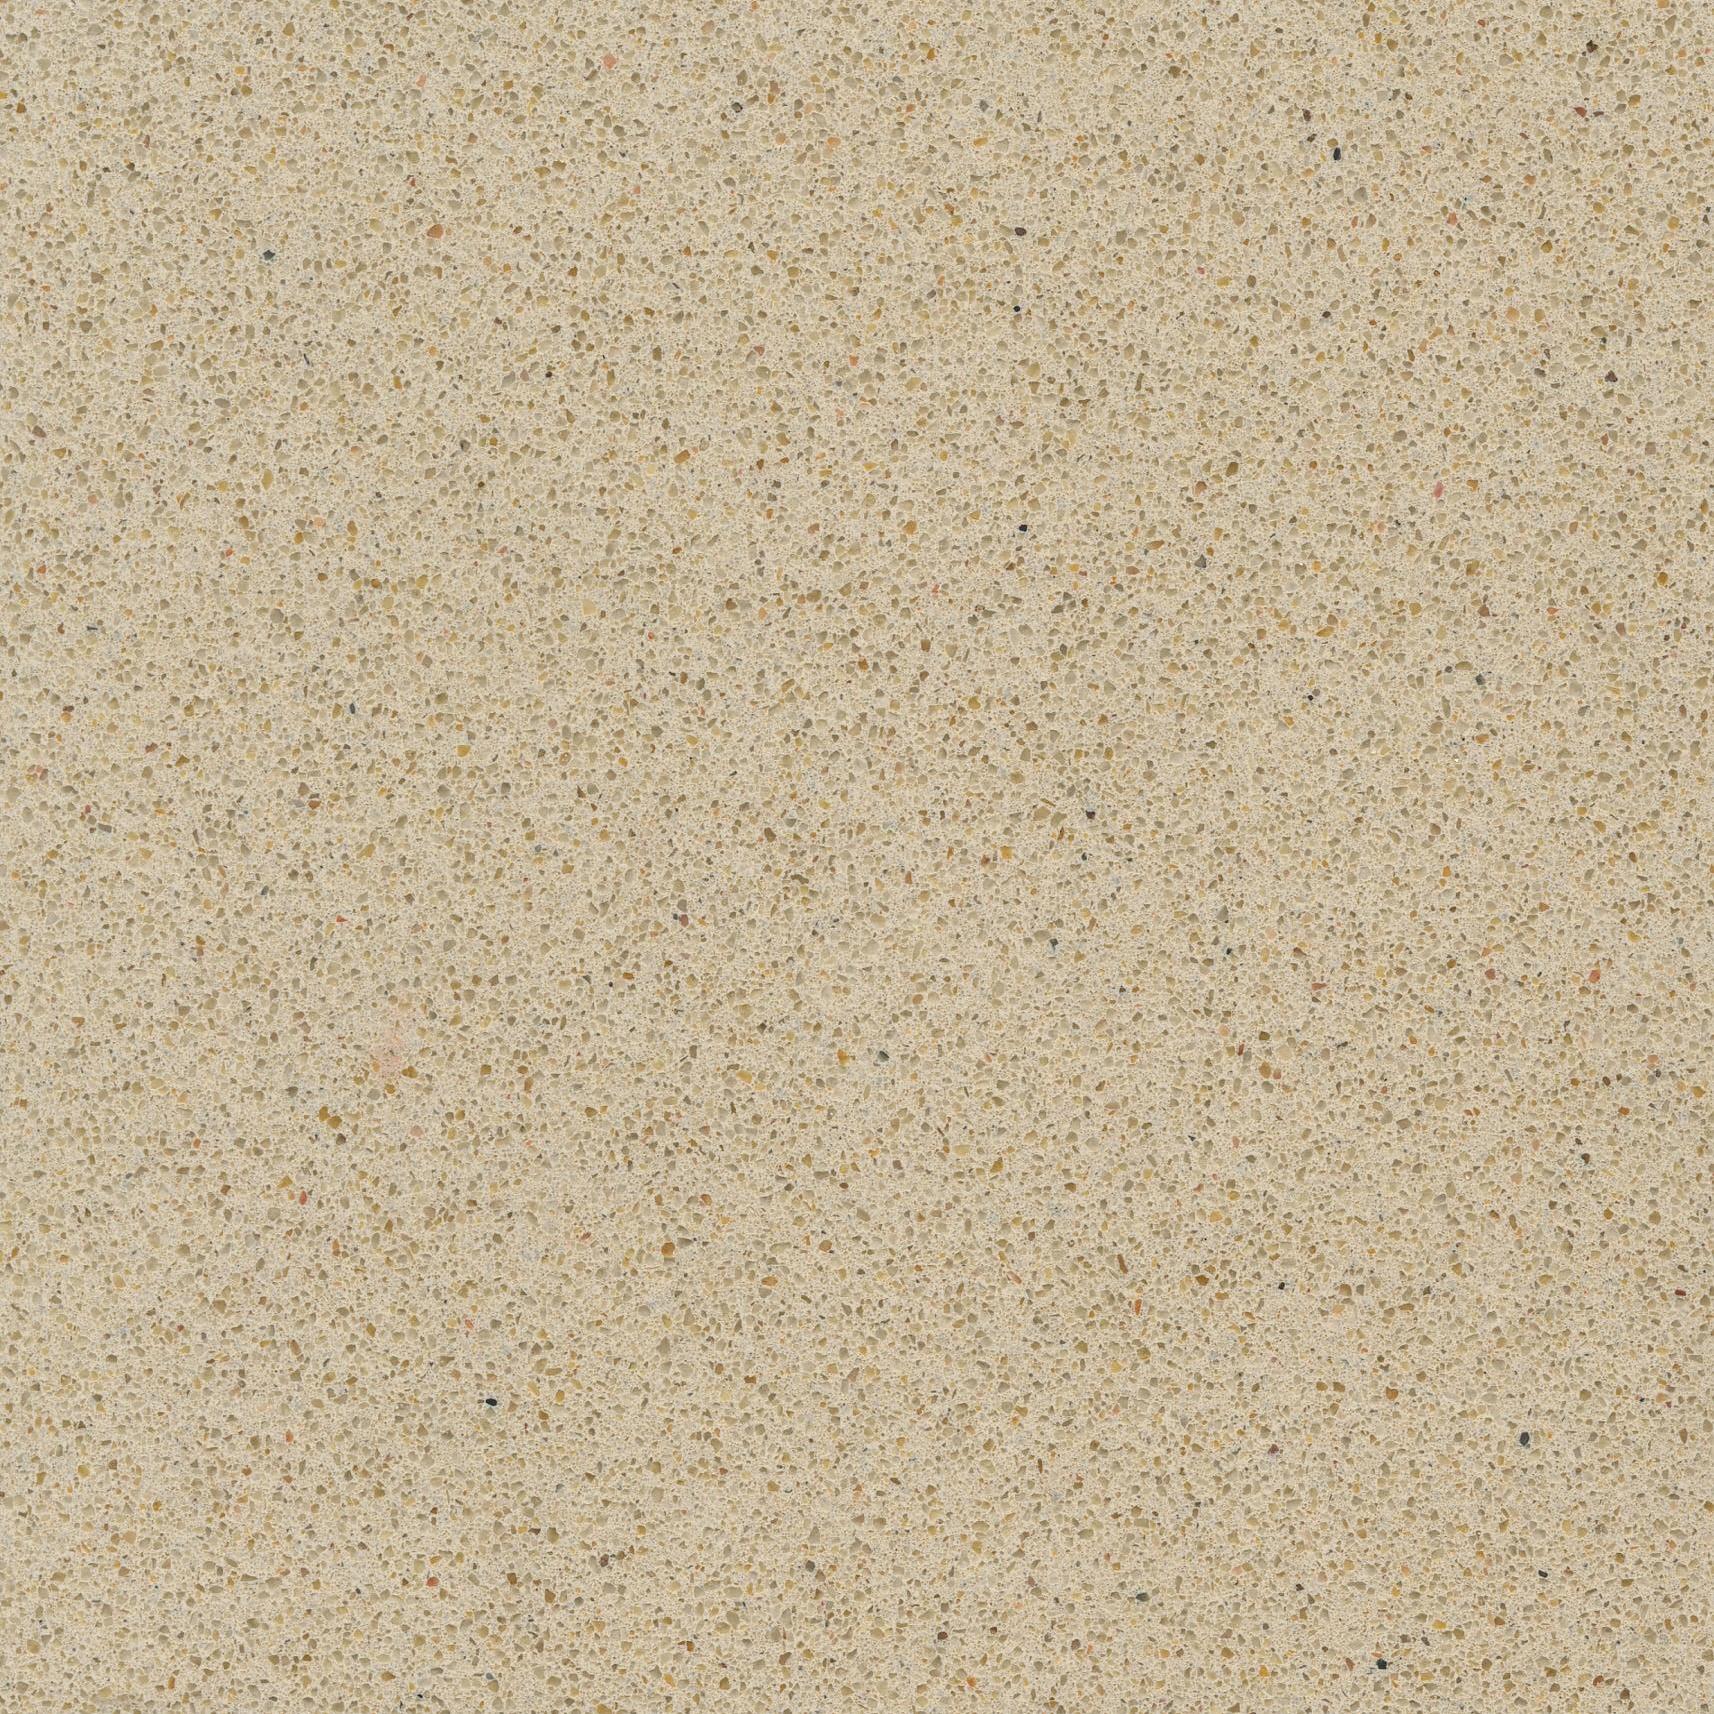 Minerva Cream, Quartz Stone Surface Material - Outlet stock from Cosentino.